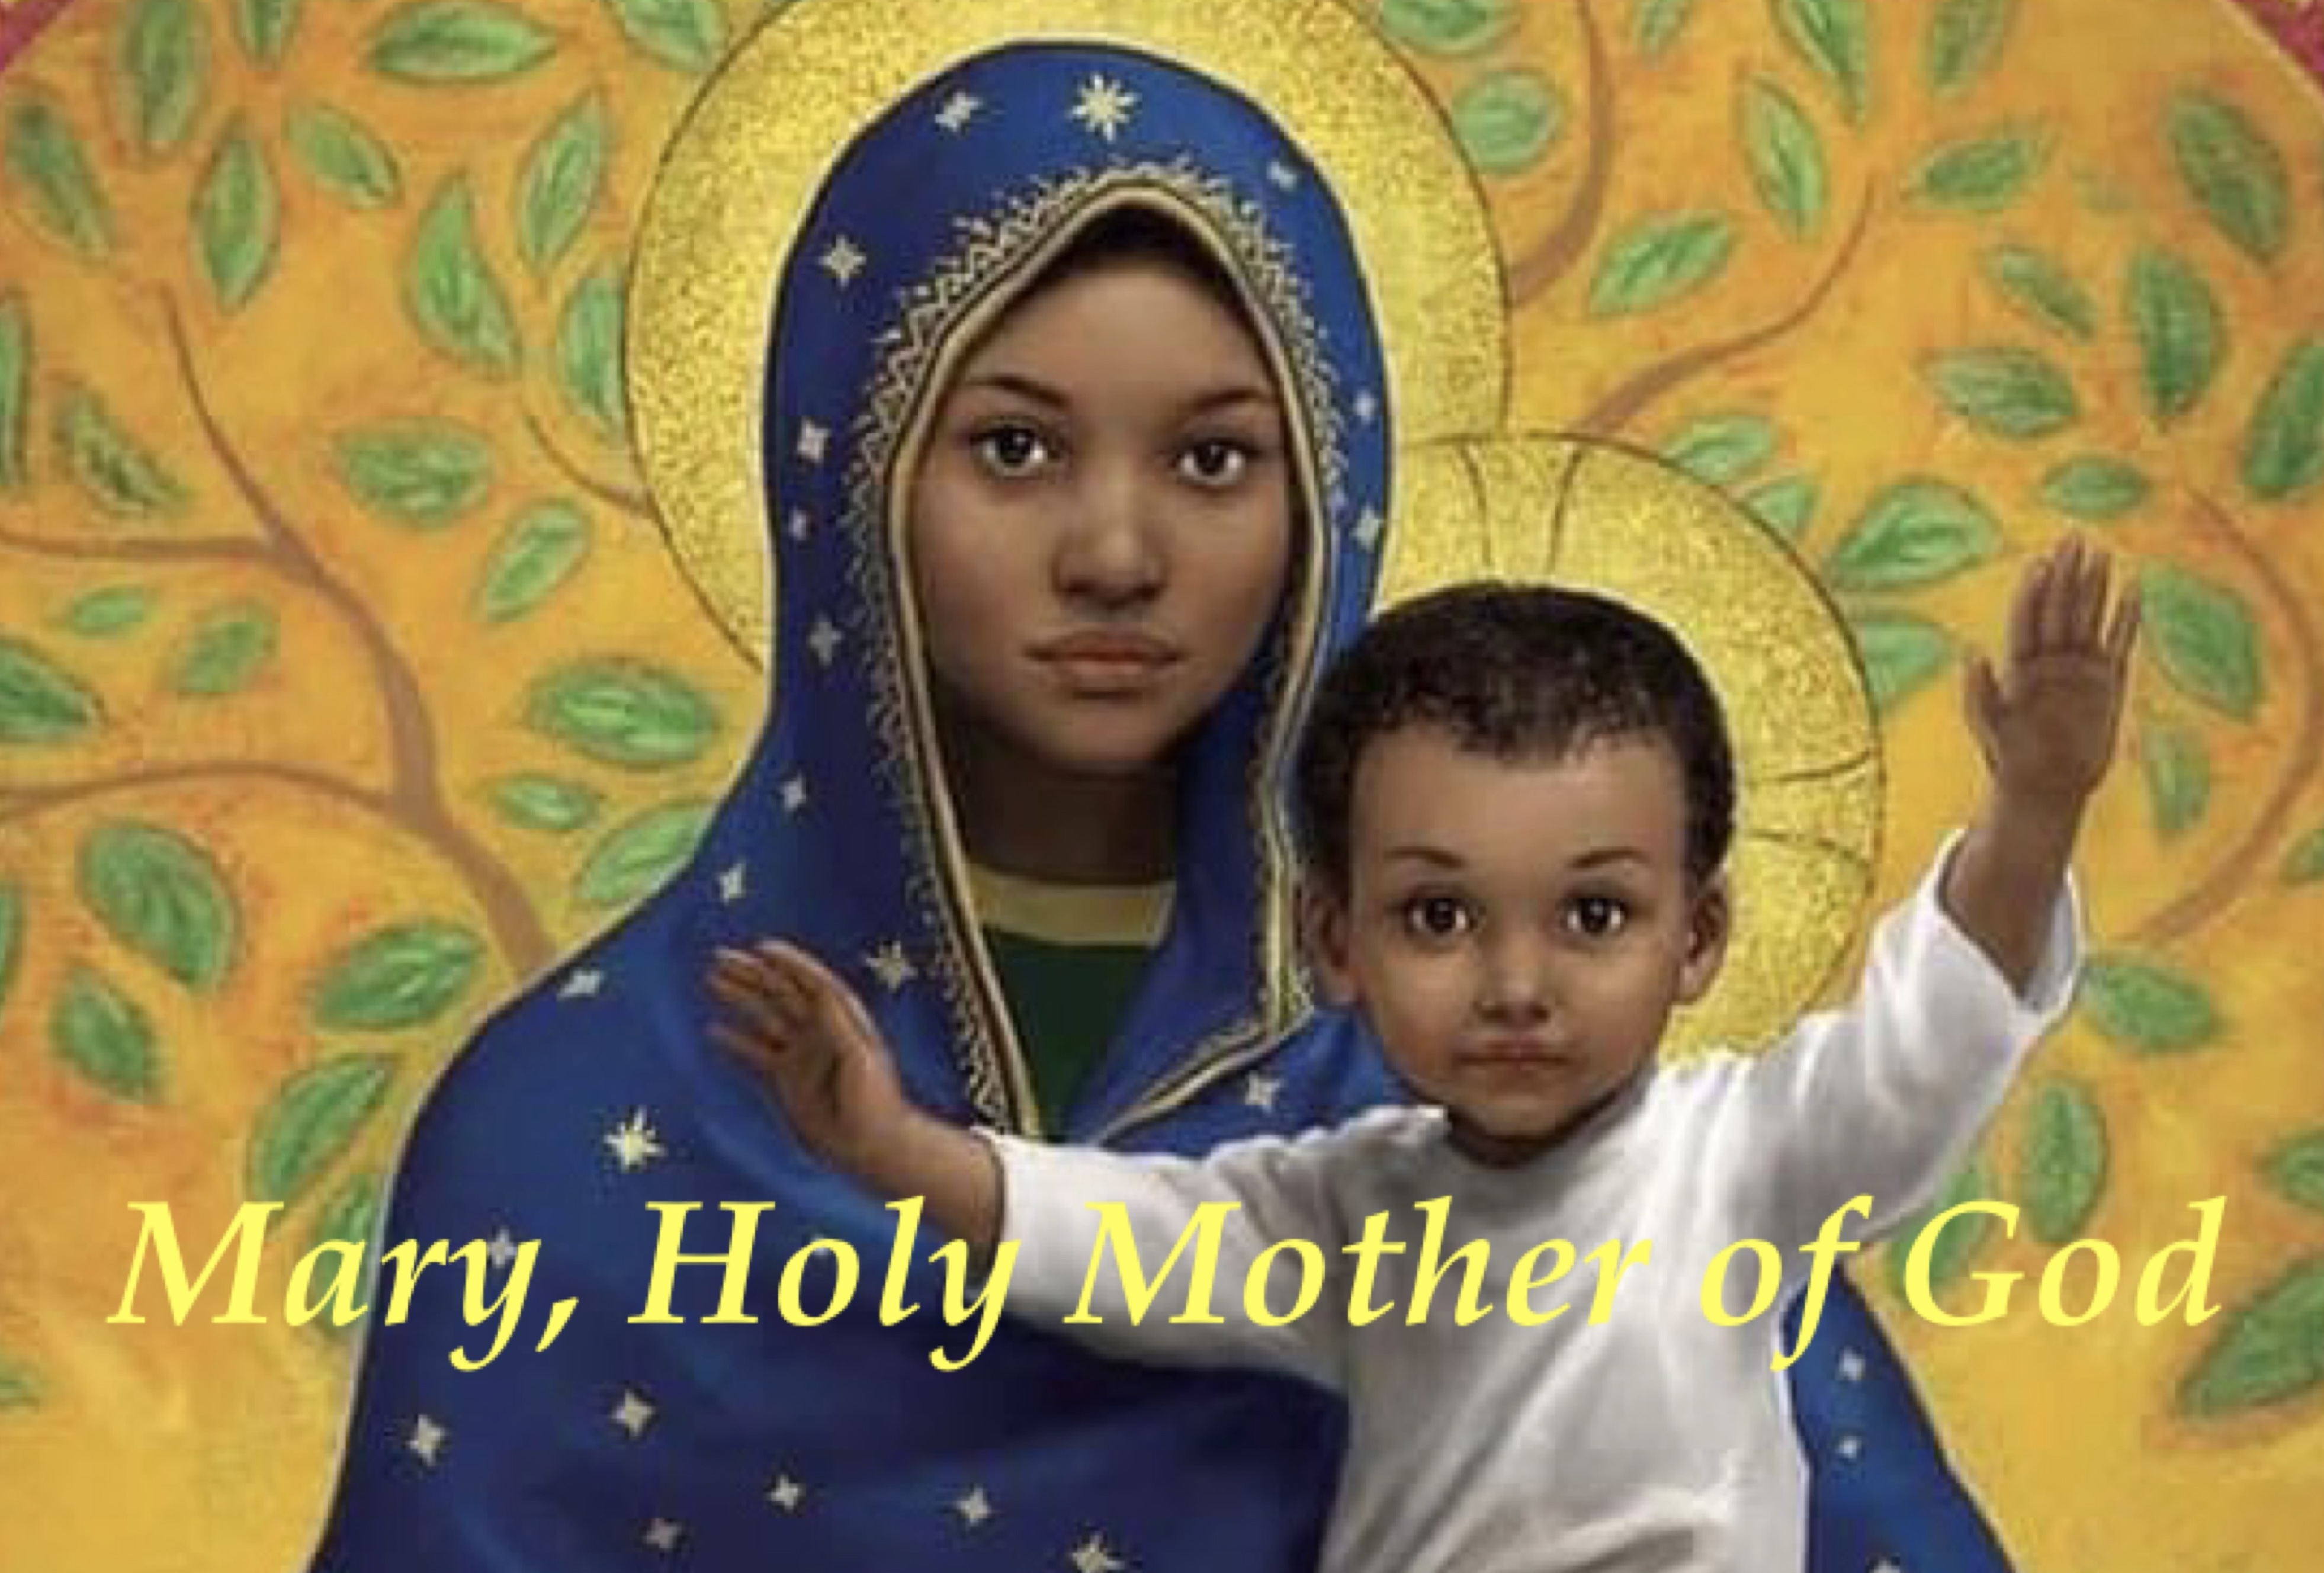 1st January - Mary, Holy Mother of God